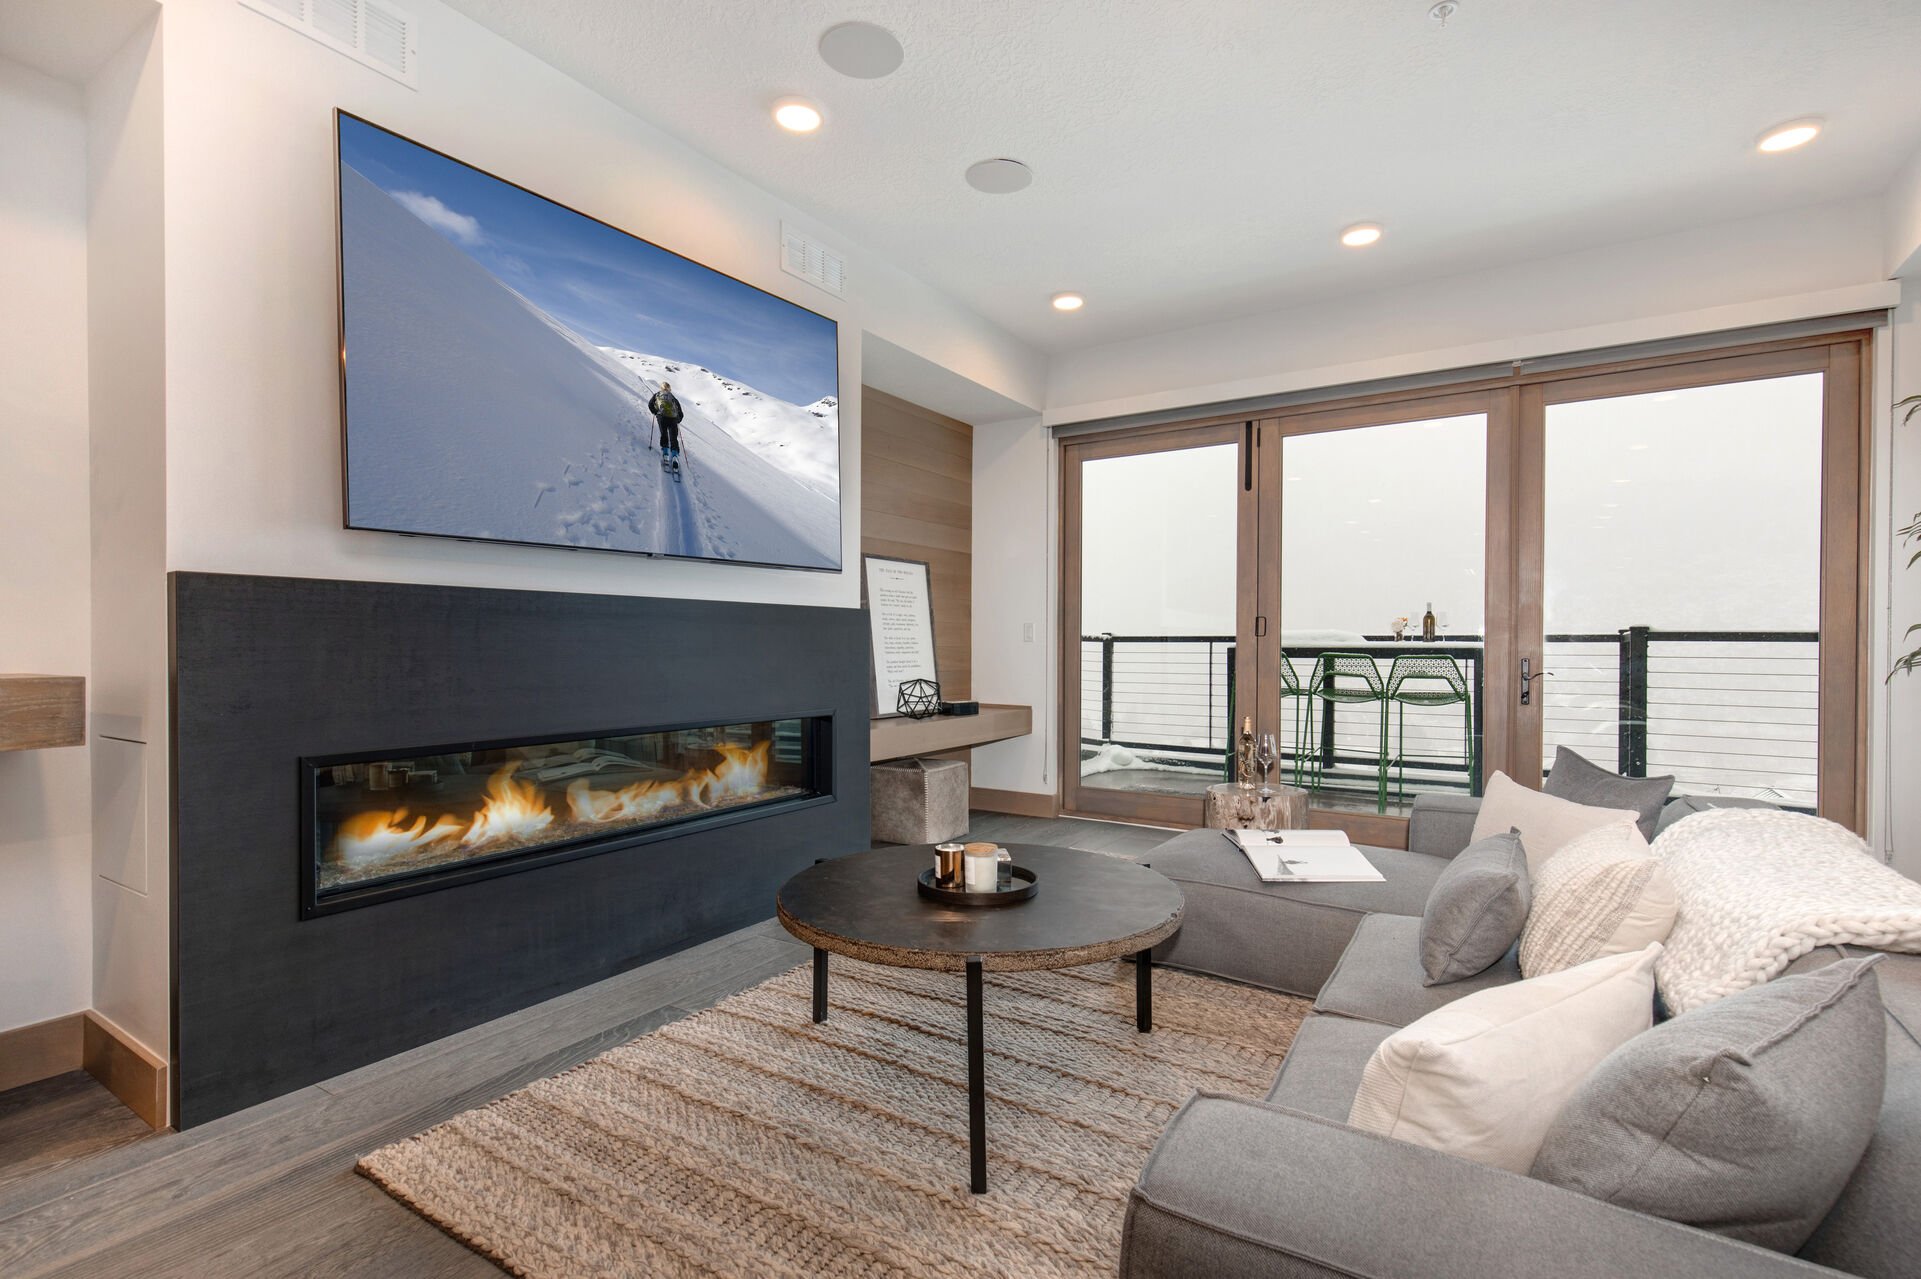 Living Room with sectional, Smart TV, gas fireplace, and private balcony access